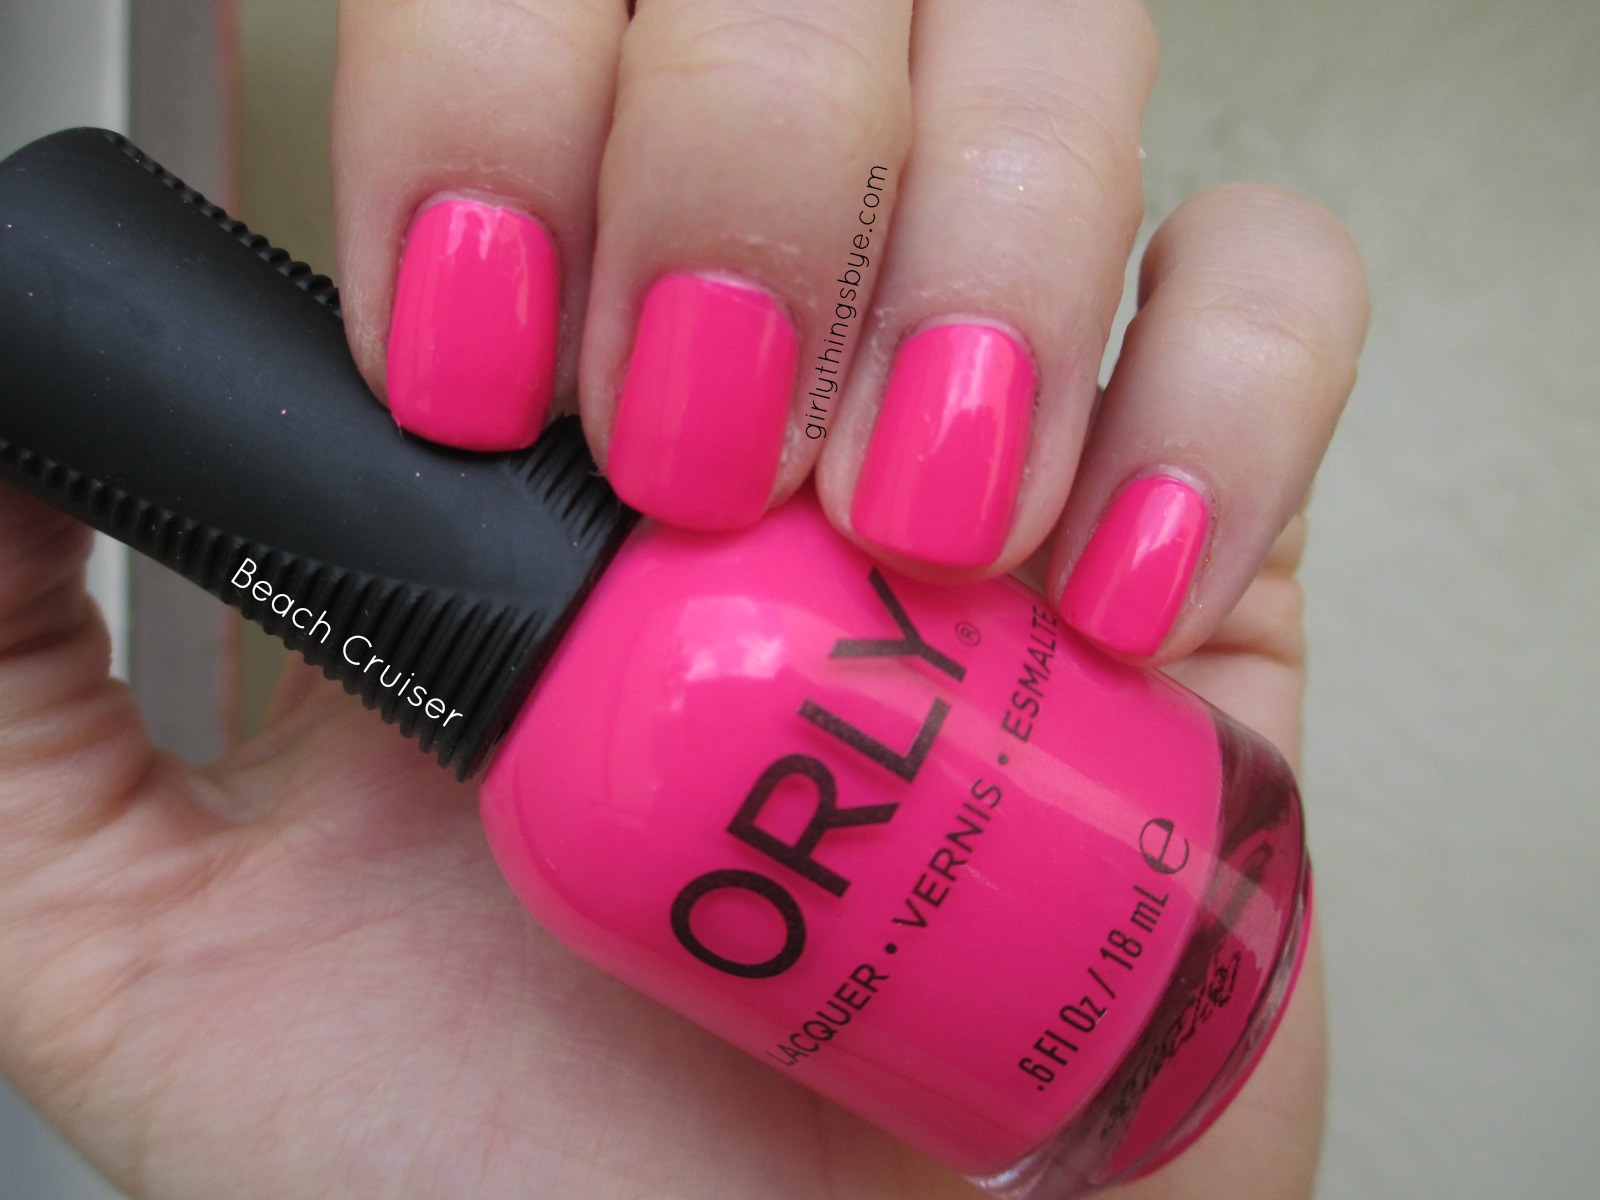 6. Orly Nail Lacquer in "Beach Cruiser" - wide 6